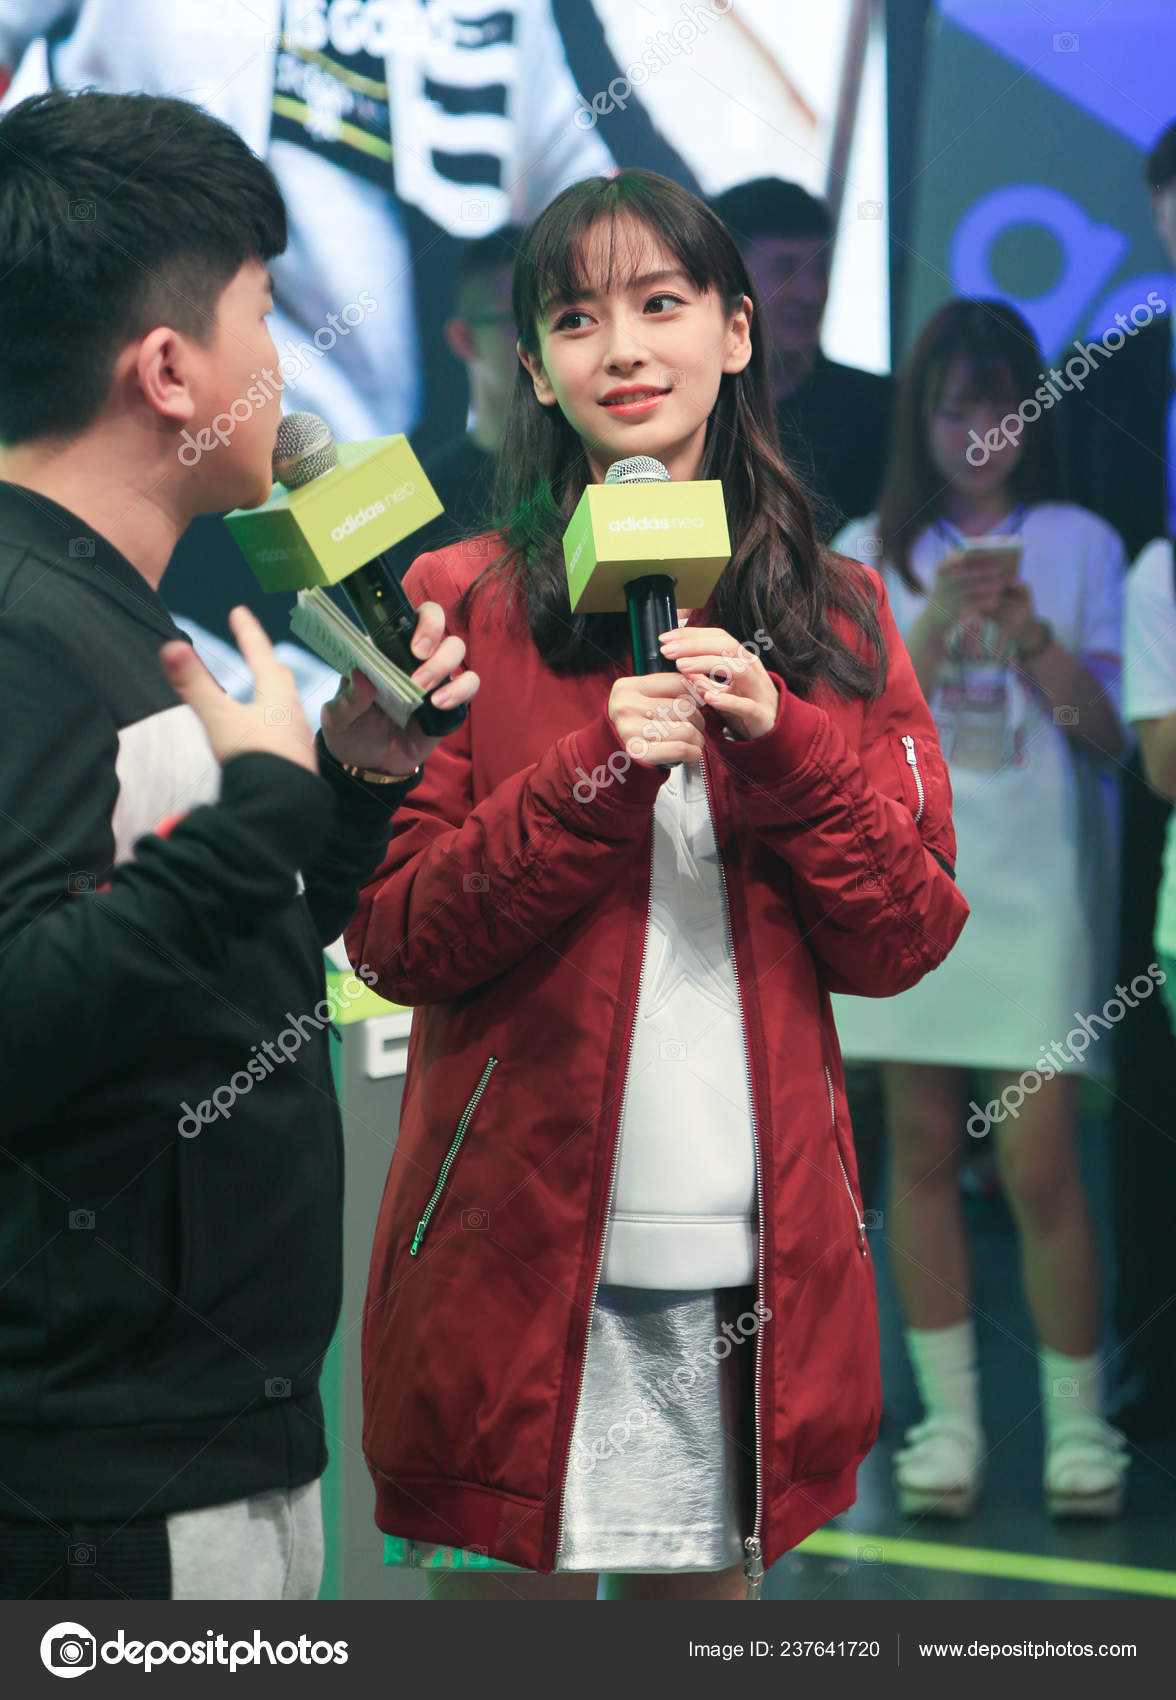 Hong Kong Model Actress Angelababy Attends Promotional Event Adidas Neo – Editorial Photo © ChinaImages #237641720